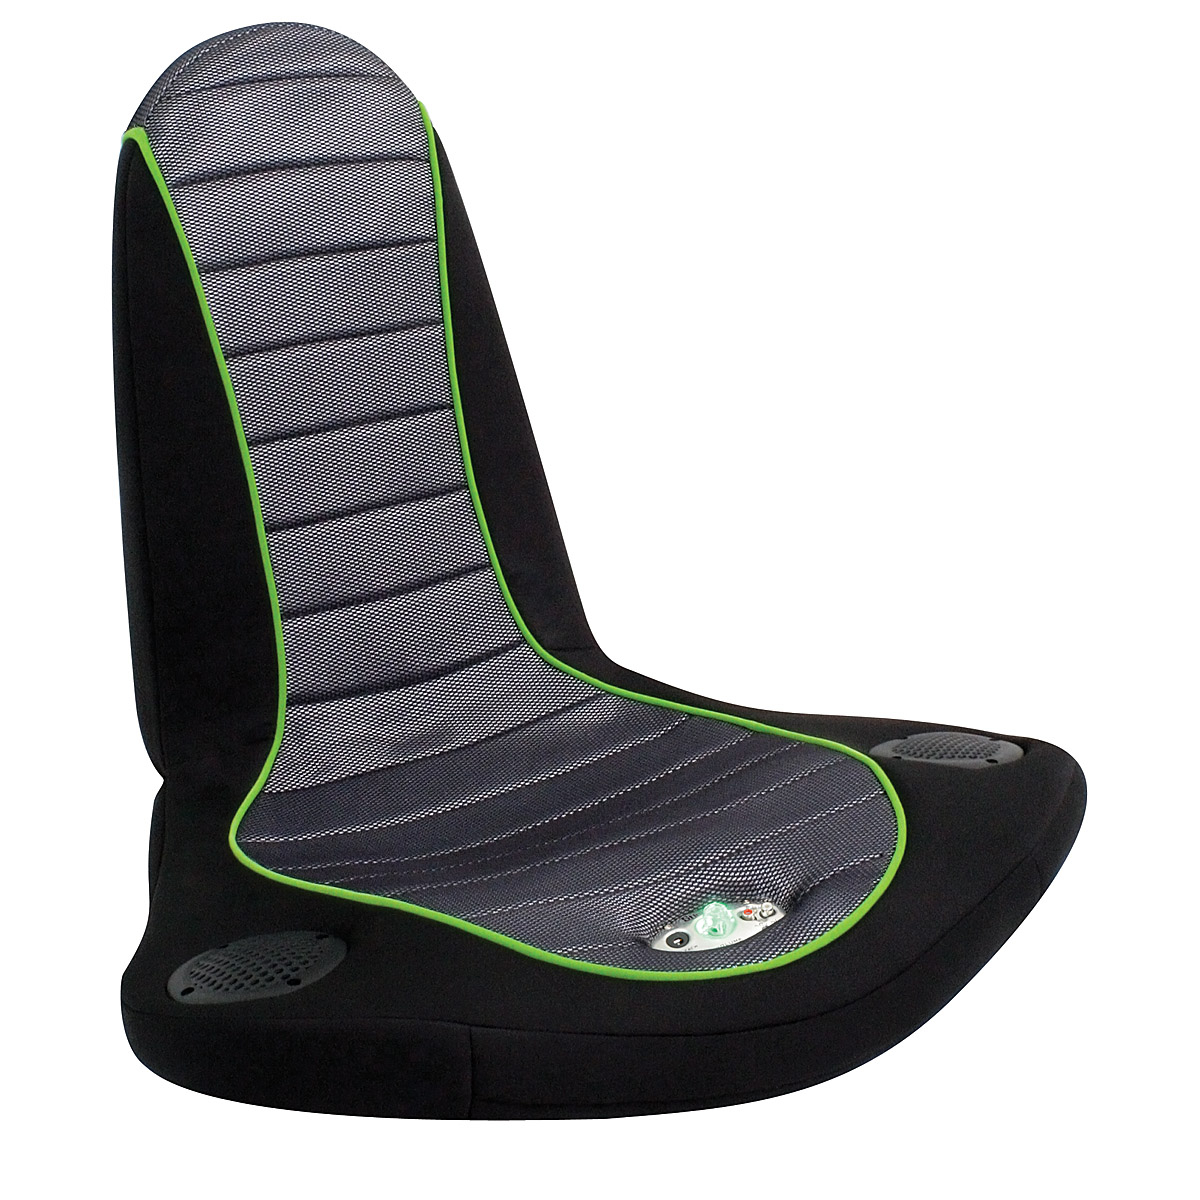 boom pulse bluetooth gaming chair for playstation ps3 ps4 xbox wii mac ipod